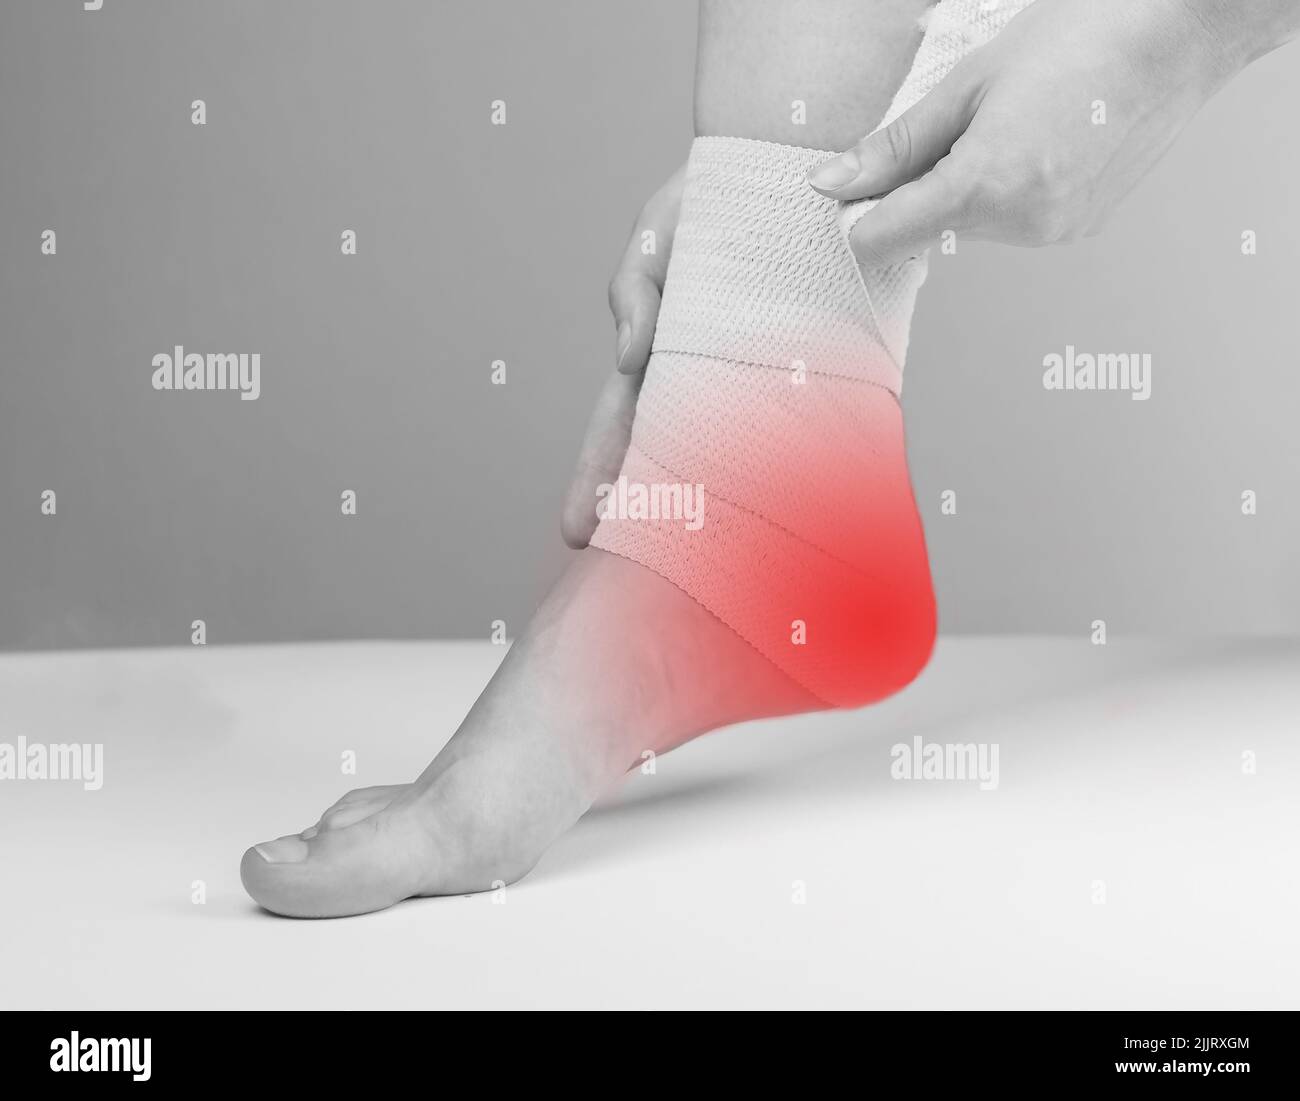 Woman wrapping elastic bandage around painful ankle to reduce heel pain and inflammation. Feet with red spot. Plantar fasciitis, tendinitis treatment. Health care concept. Black and white. photo Stock Photo